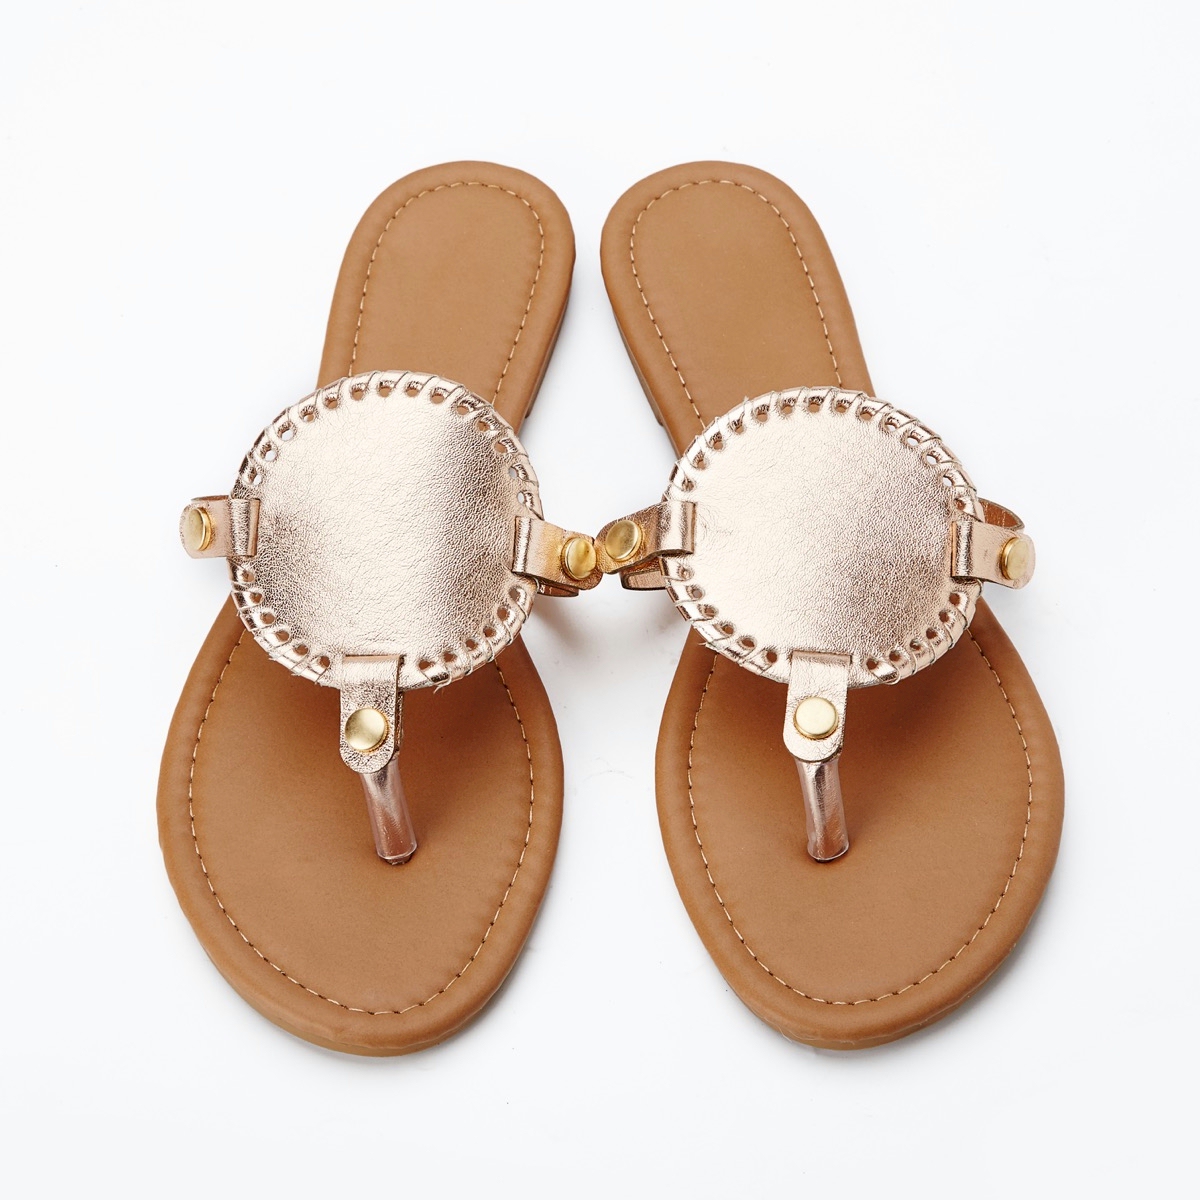 EasyStitch Medallion Sandals - ROSE GOLD - CLOSEOUT